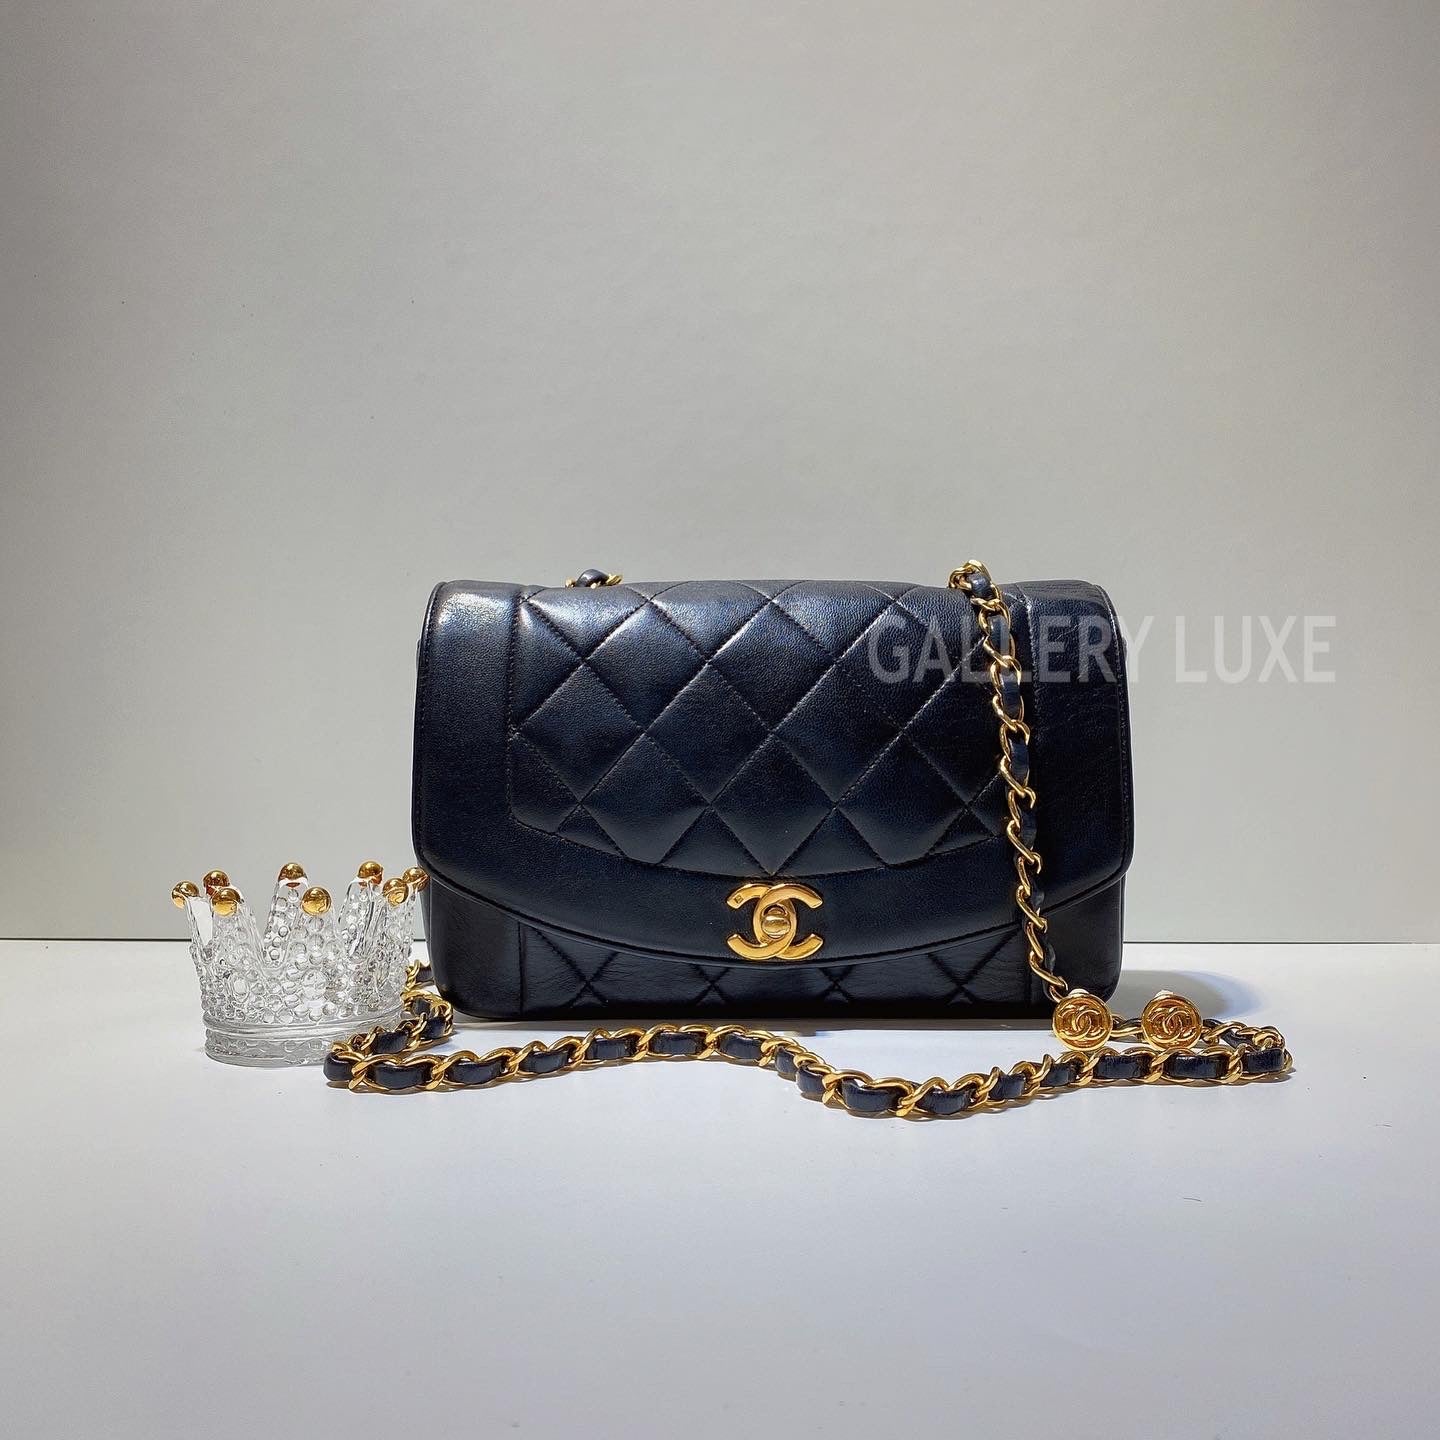 No.3136-Chanel Vintage Lambskin Diana Bag 22cm – Gallery Luxe